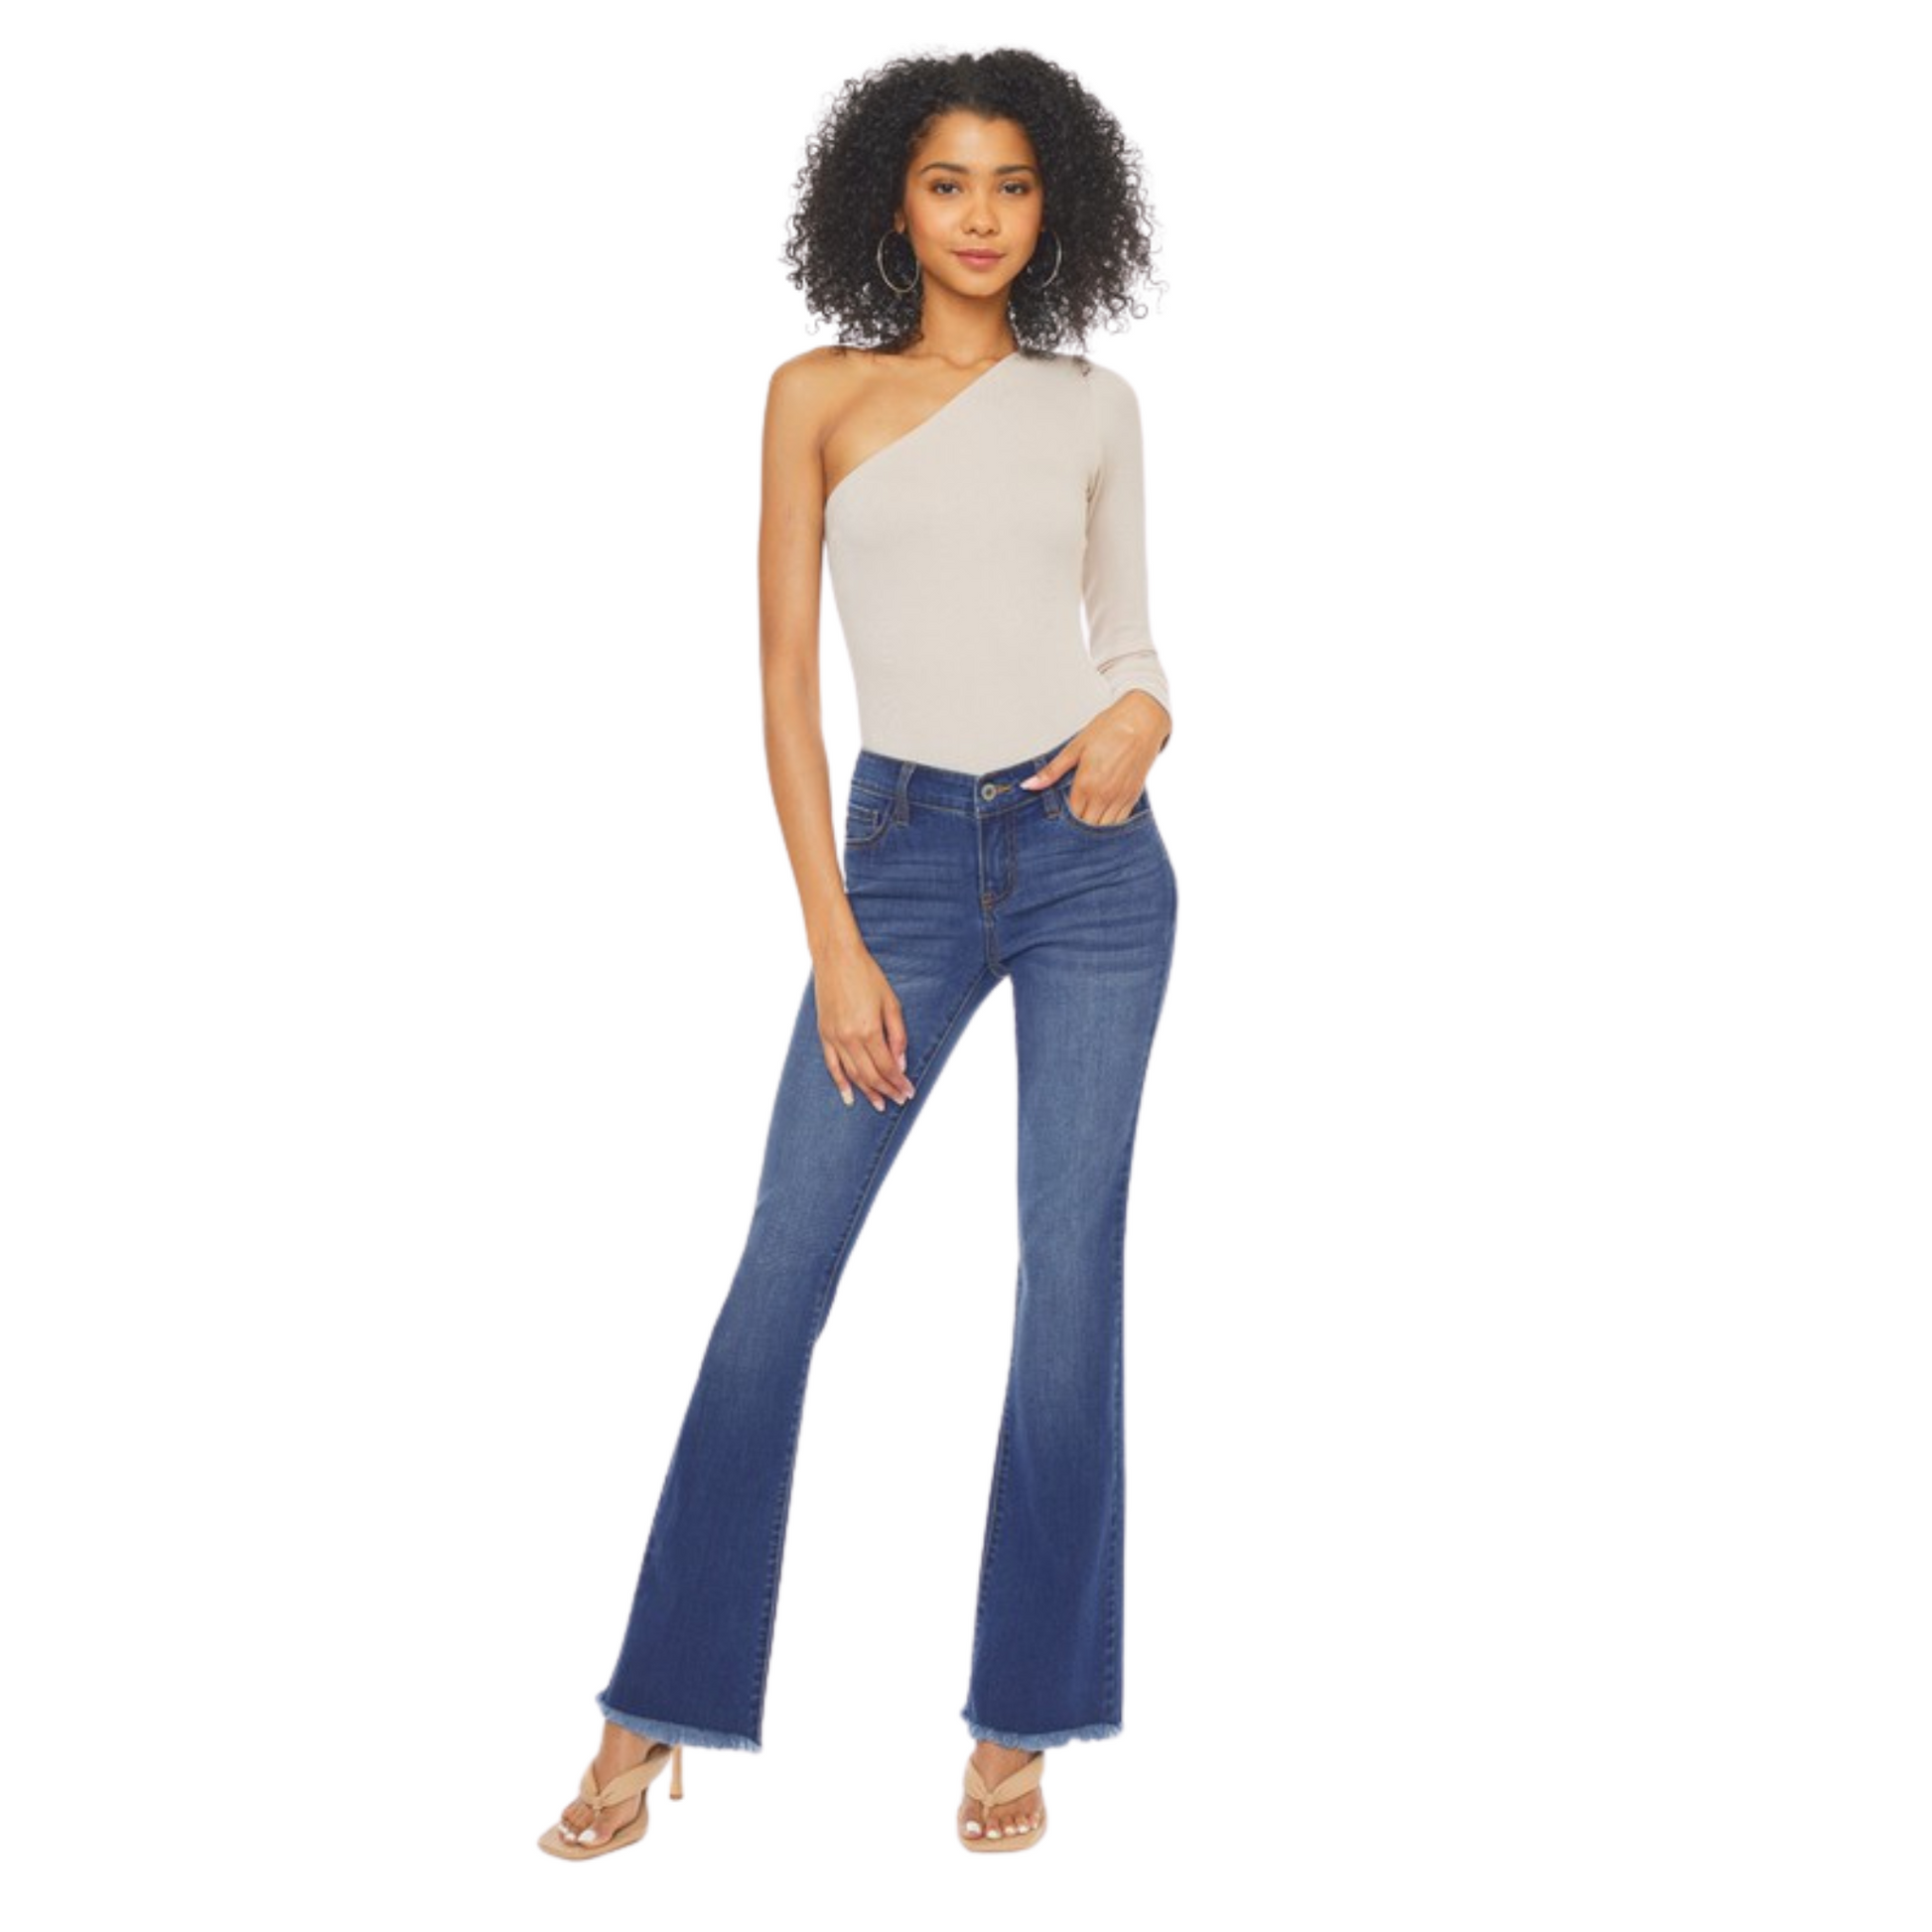 These Low Rise Frayed Hem Bootcut Jeans provide style and comfort, with a raw hem and medium wash. The design features a classic bootcut fit that's flattering and easy to wear. Enjoy all-day comfort and a fashionable, modern look.